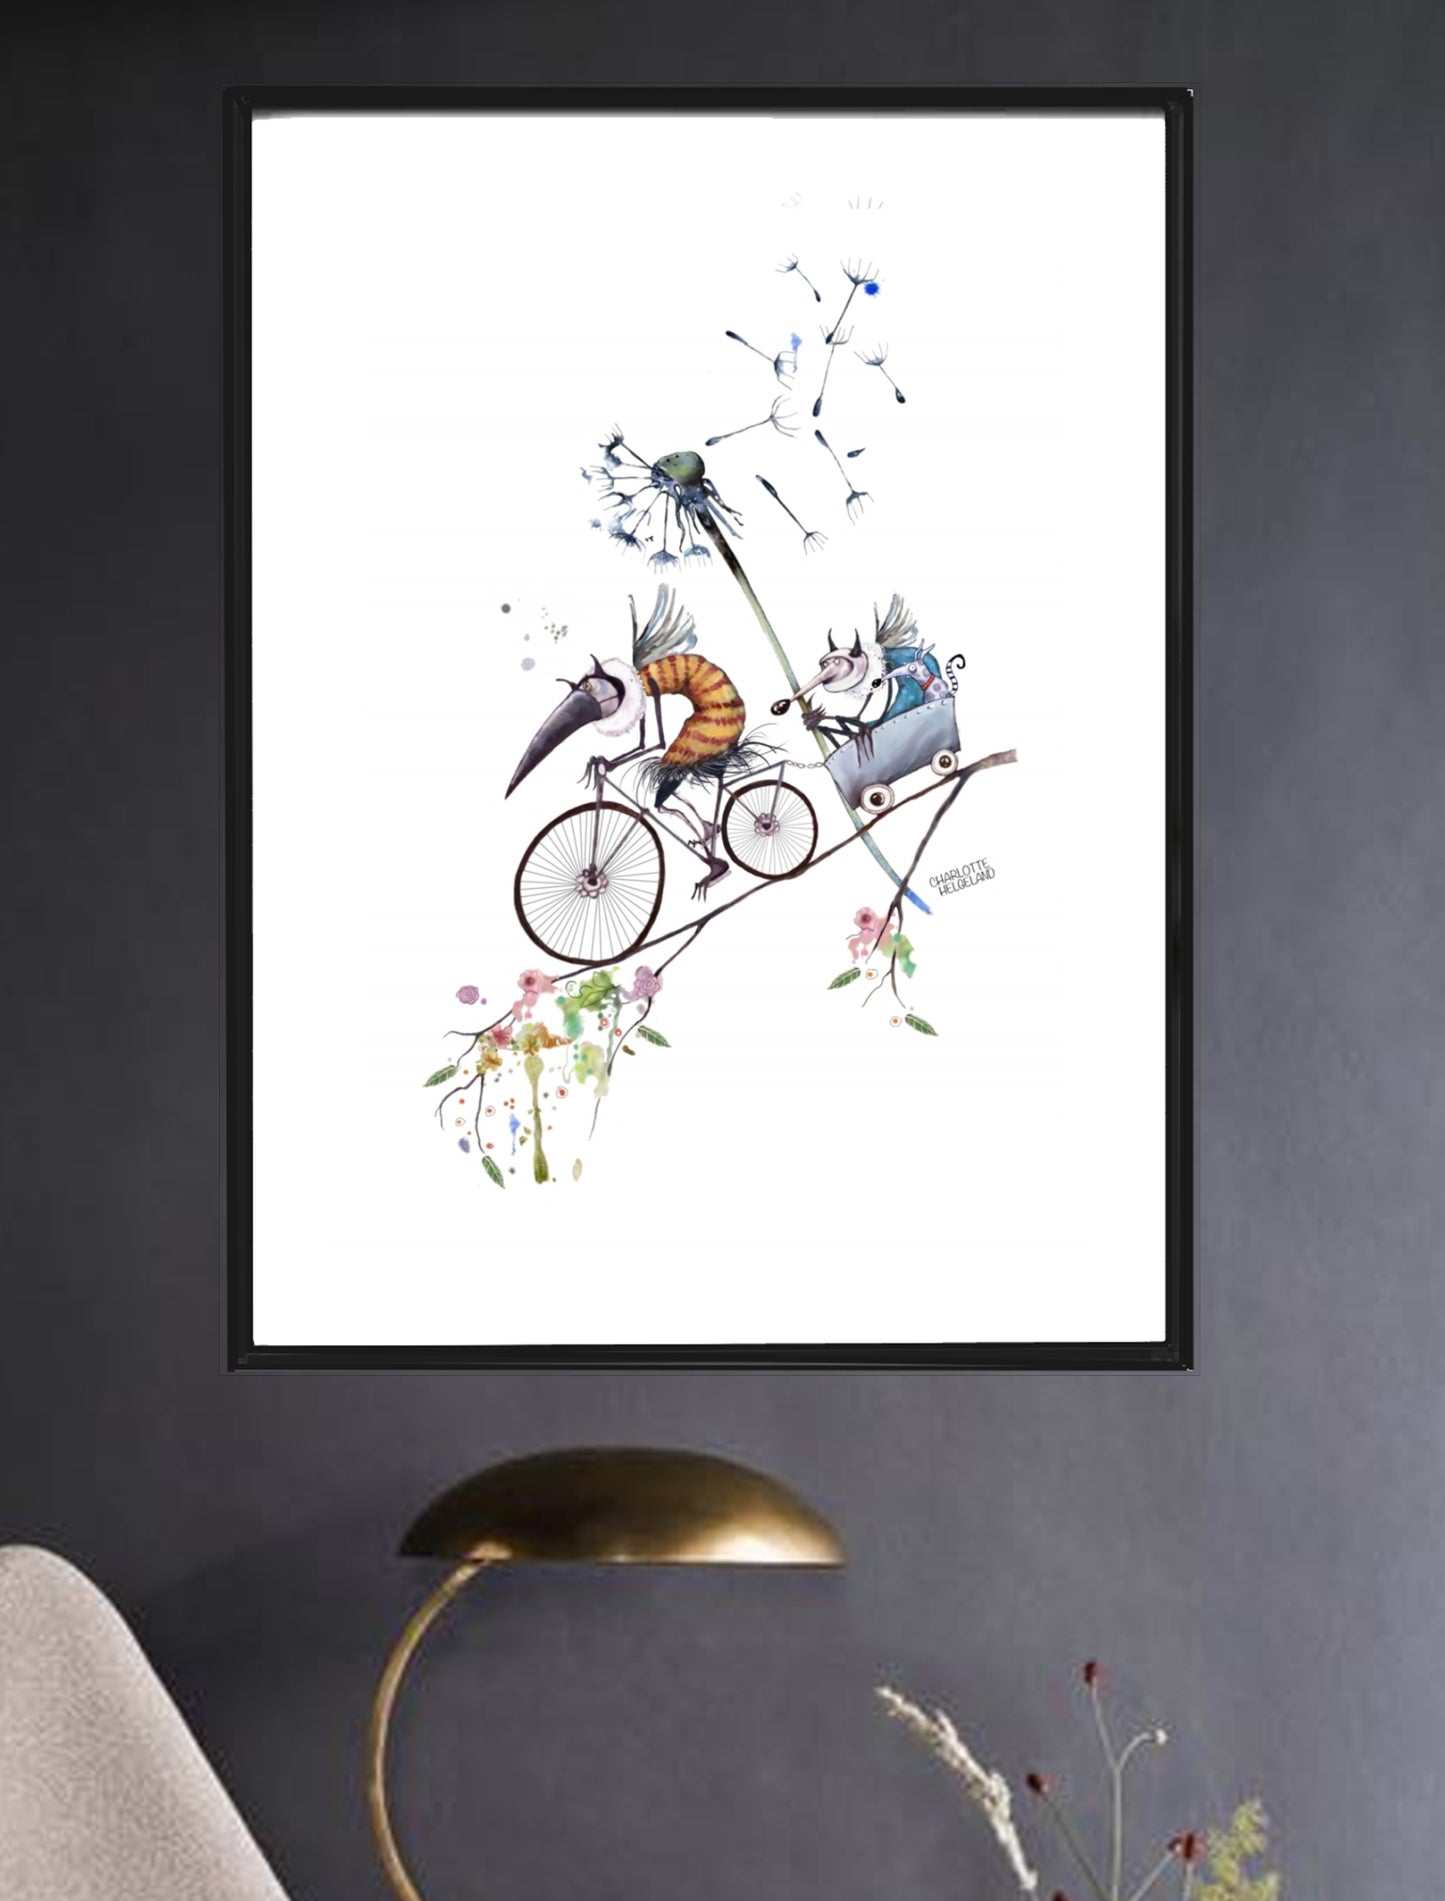 Ride in the park! - plakat 50x70